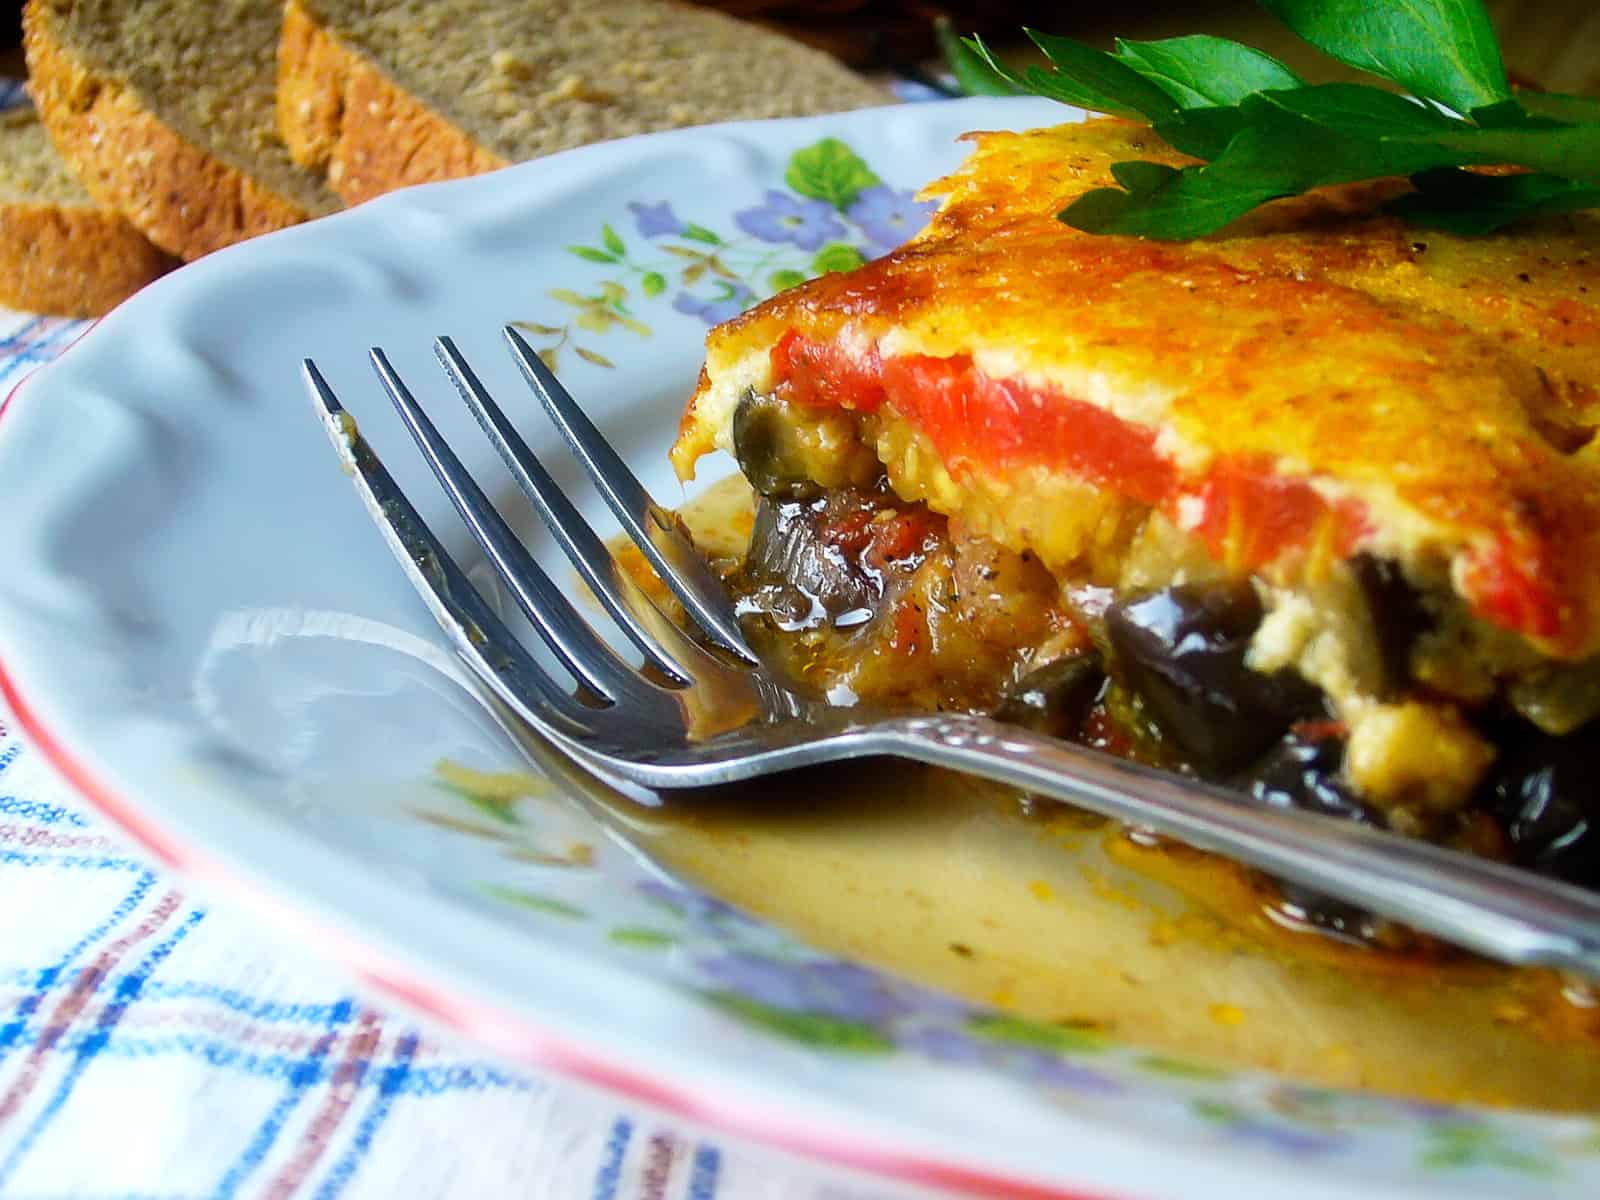 Moussaka is traditionally made with fried eggplant and salsa